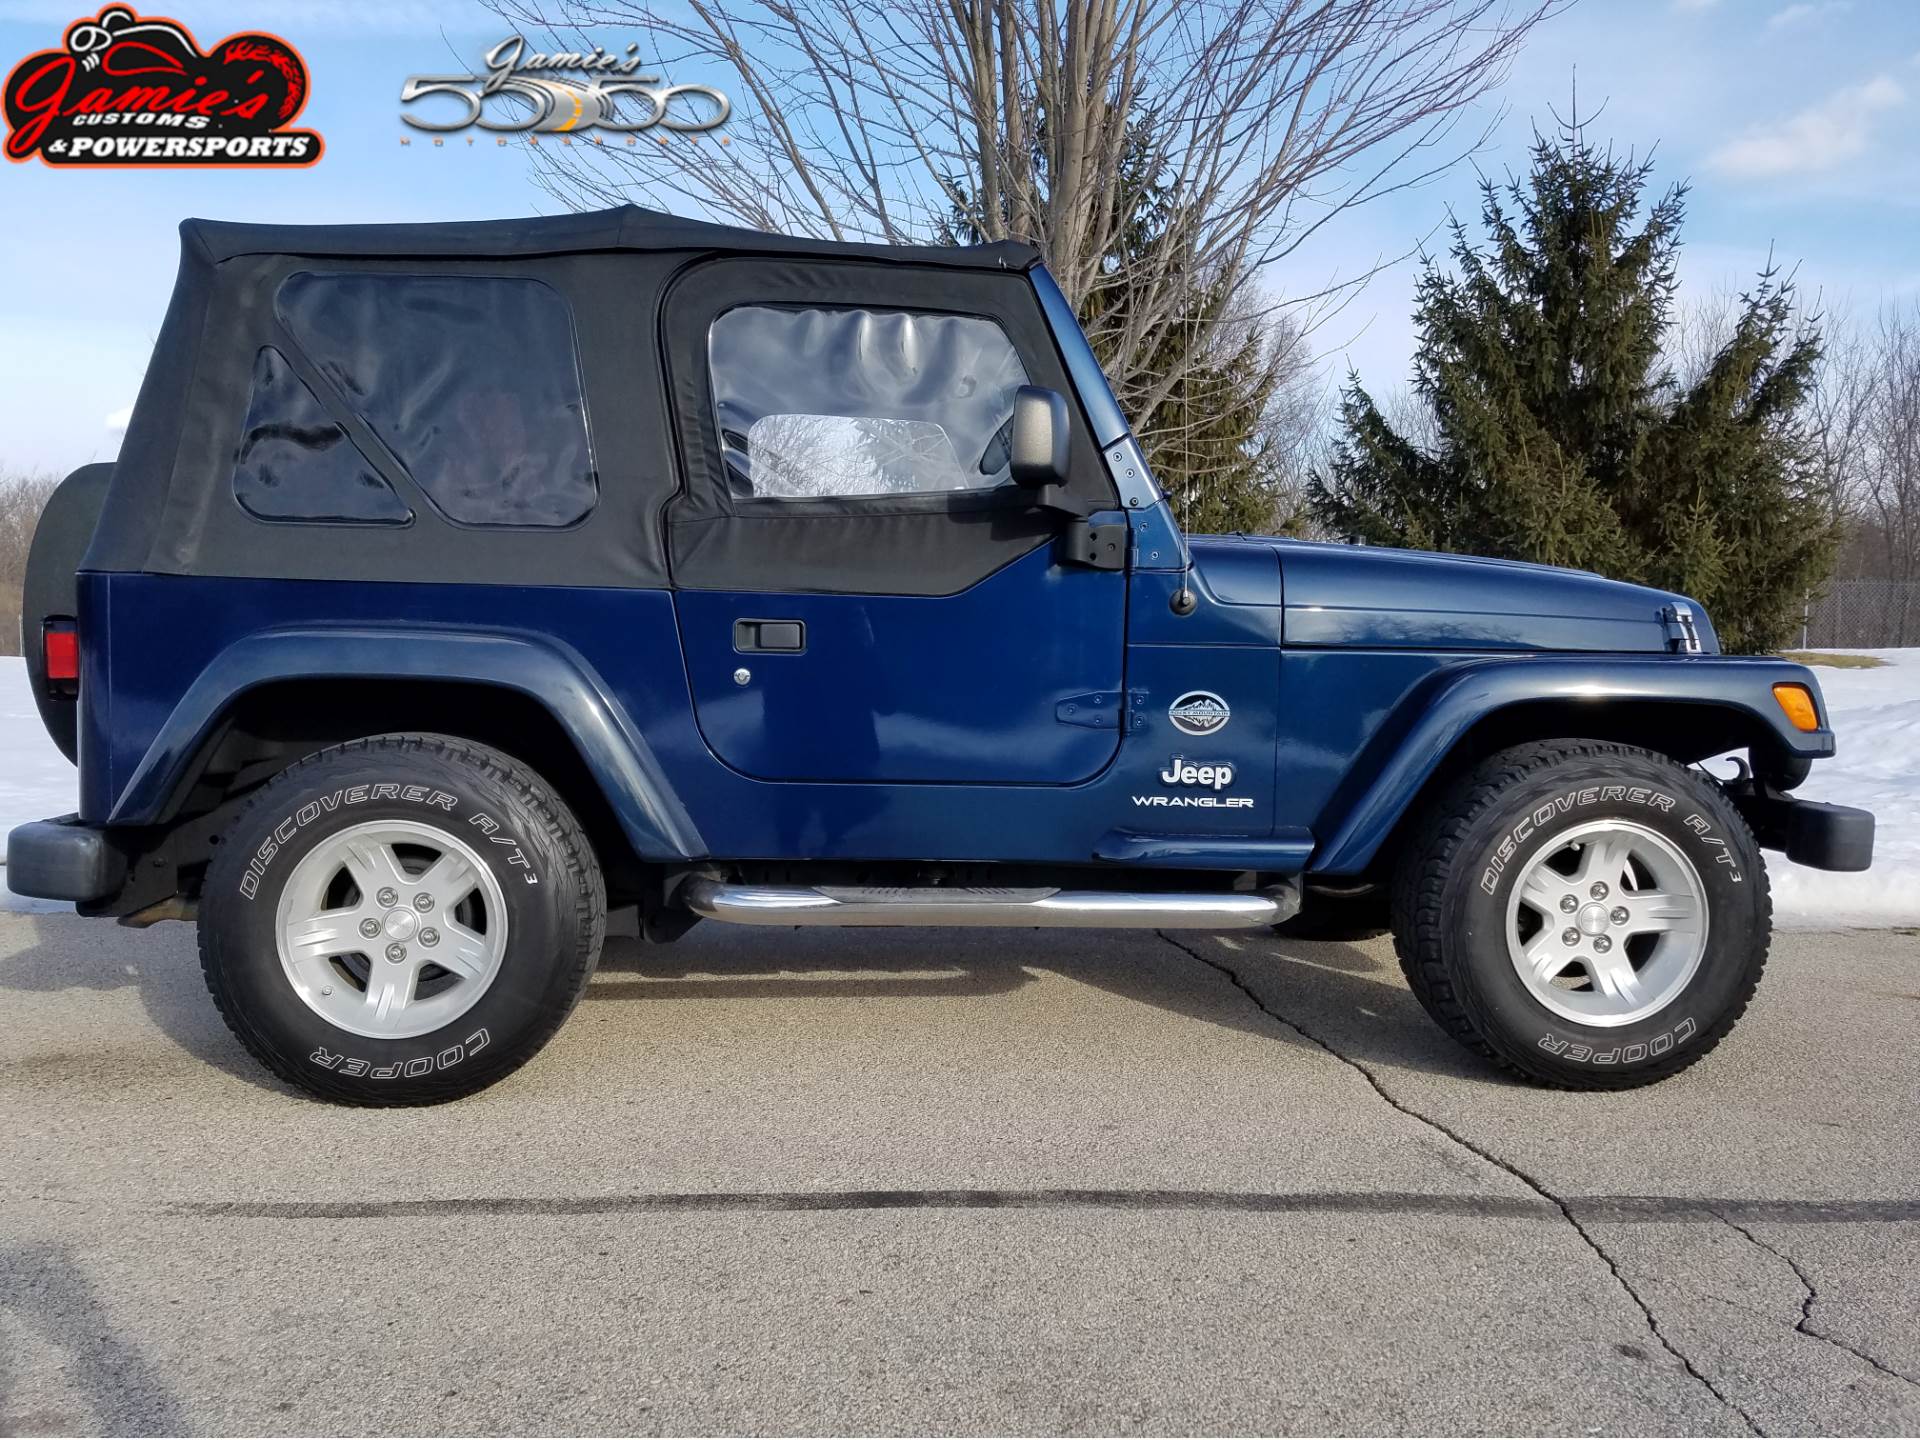 2005 Jeep® Wrangler Rocky Mountain Edition in Big Bend, Wisconsin - Photo 2